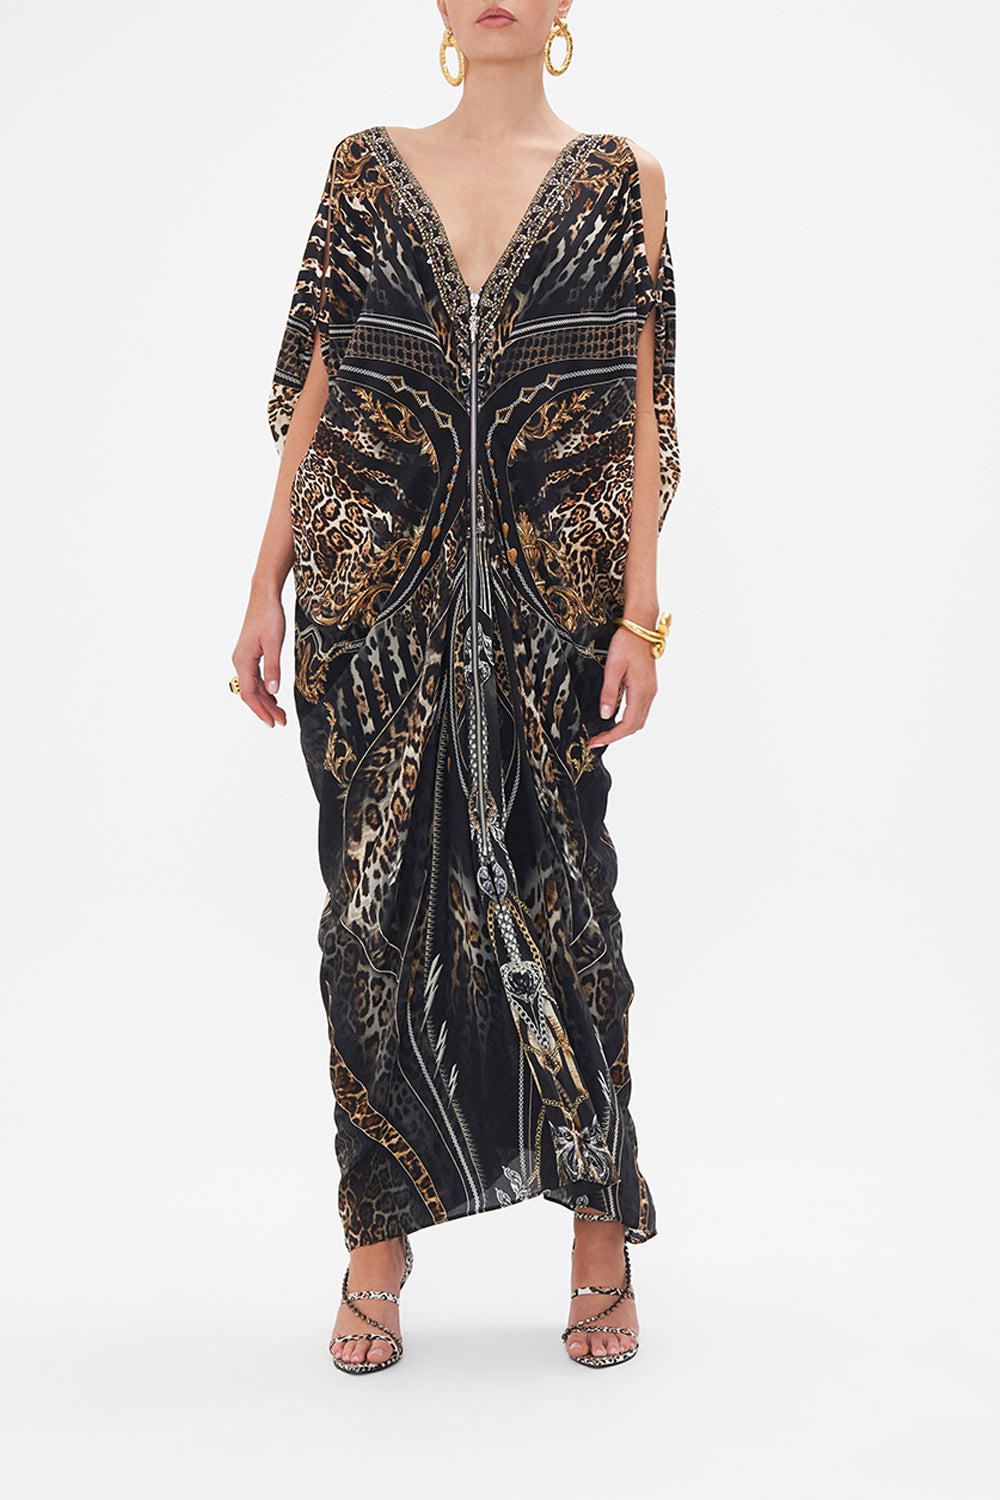 Front view of model wearing CAMILLA silk maxi dress Chaos In The Cosmos animal print